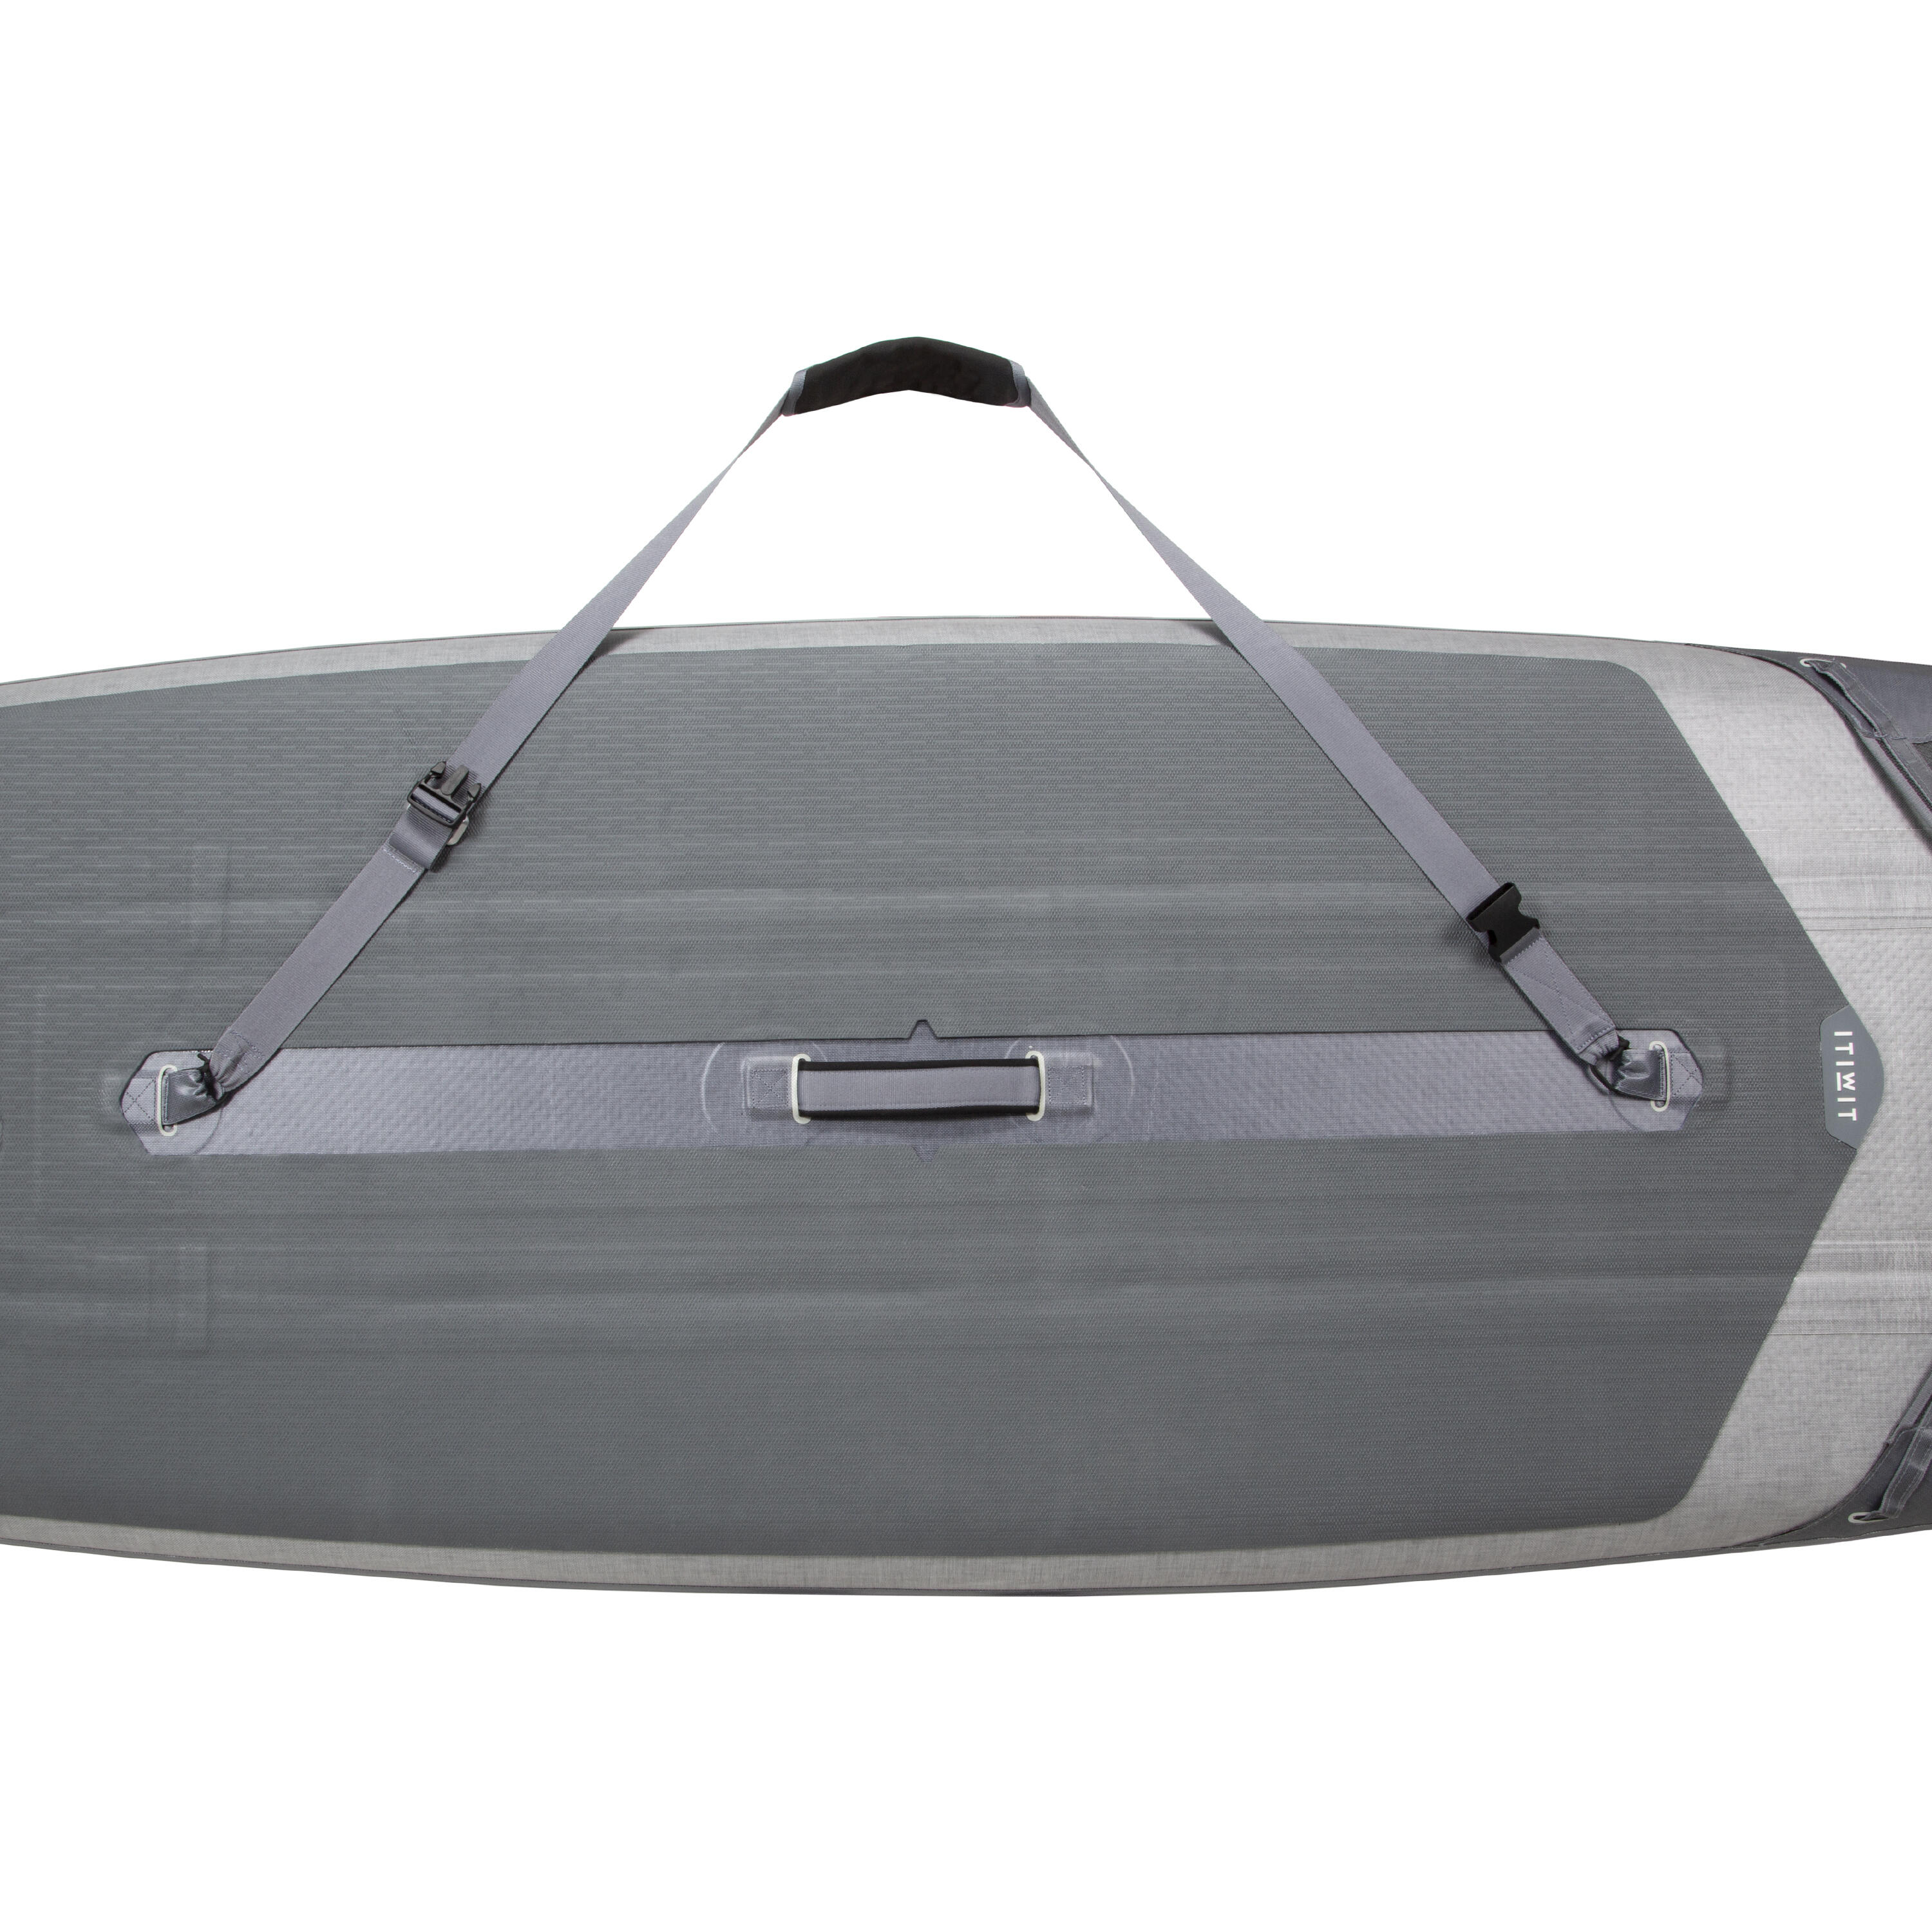 X900 14FT EXPEDITION INFLATABLE STAND-UP PADDLEBOARD (DOUBLE CHAMBER) 11/26